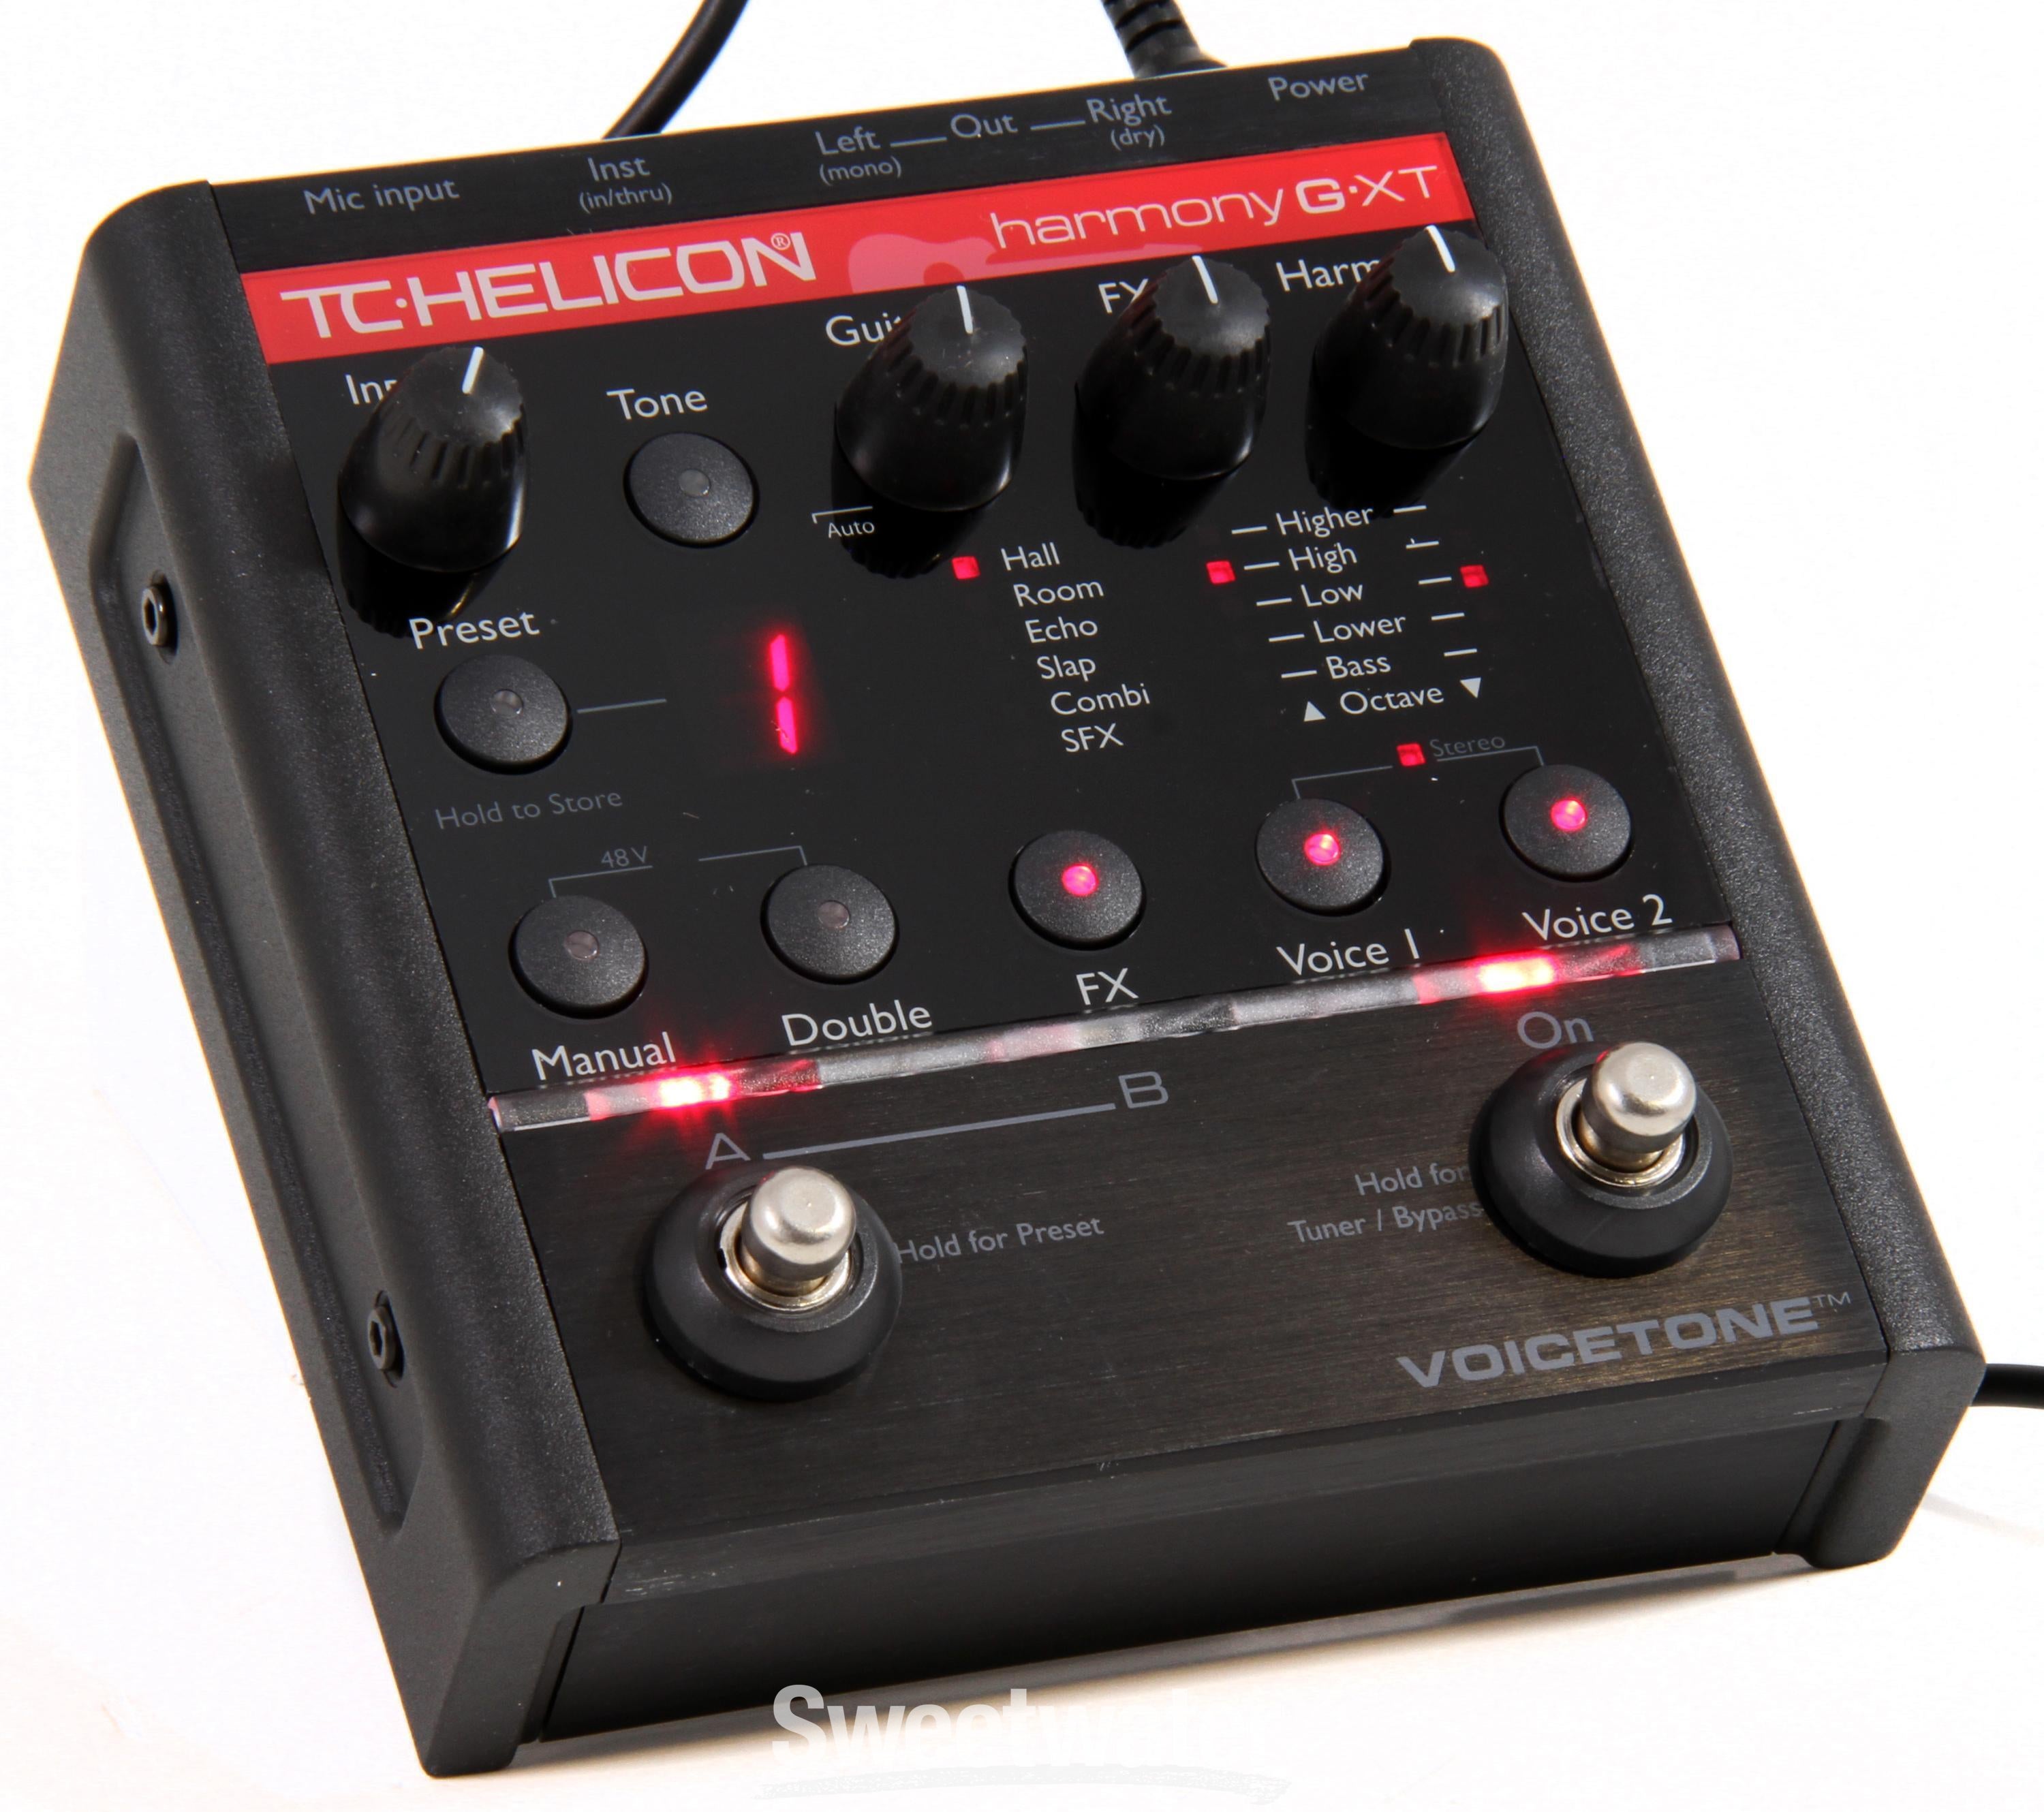 TC-Helicon VoiceTone Harmony-G XT Vocal Effects Pedal | Sweetwater